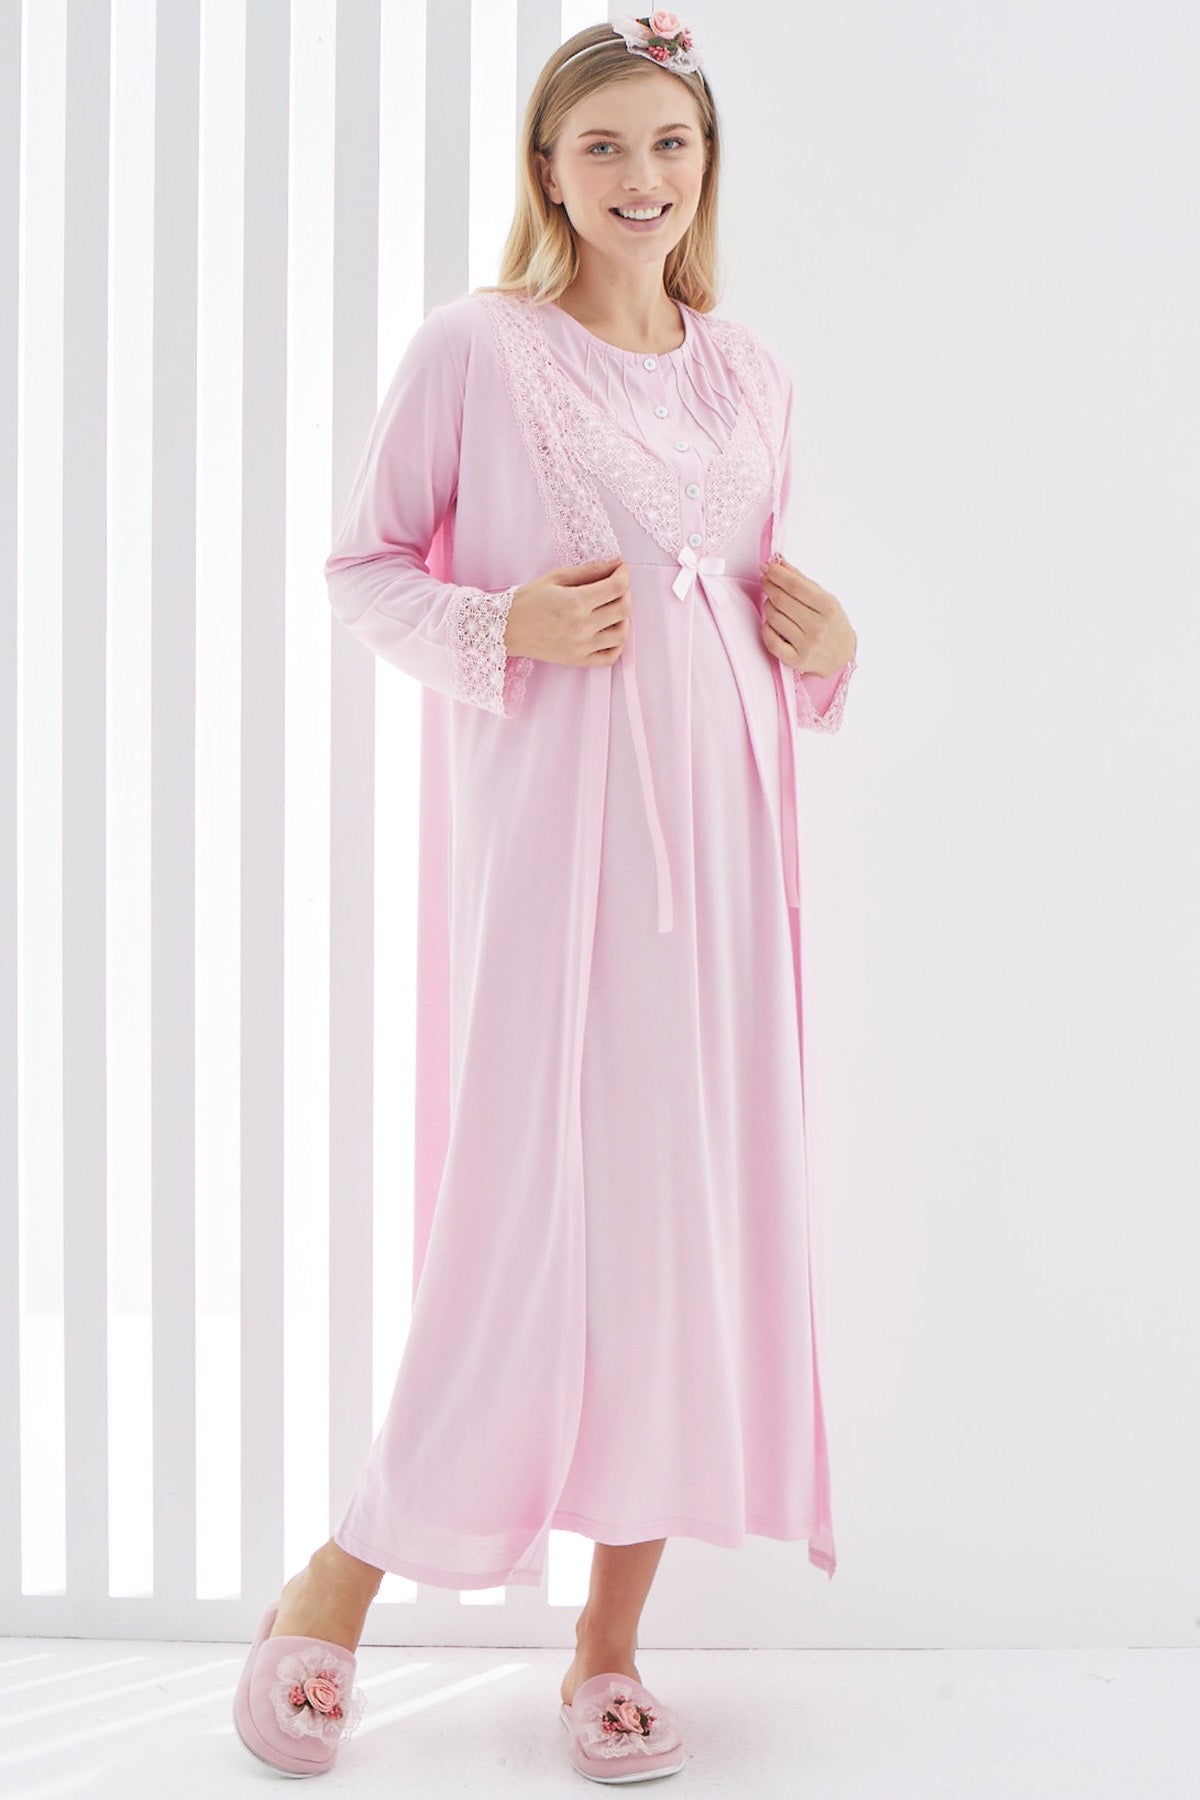 Shopymommy 2270 Lace Detailed Maternity & Nursing Nightgown With Robe Pink